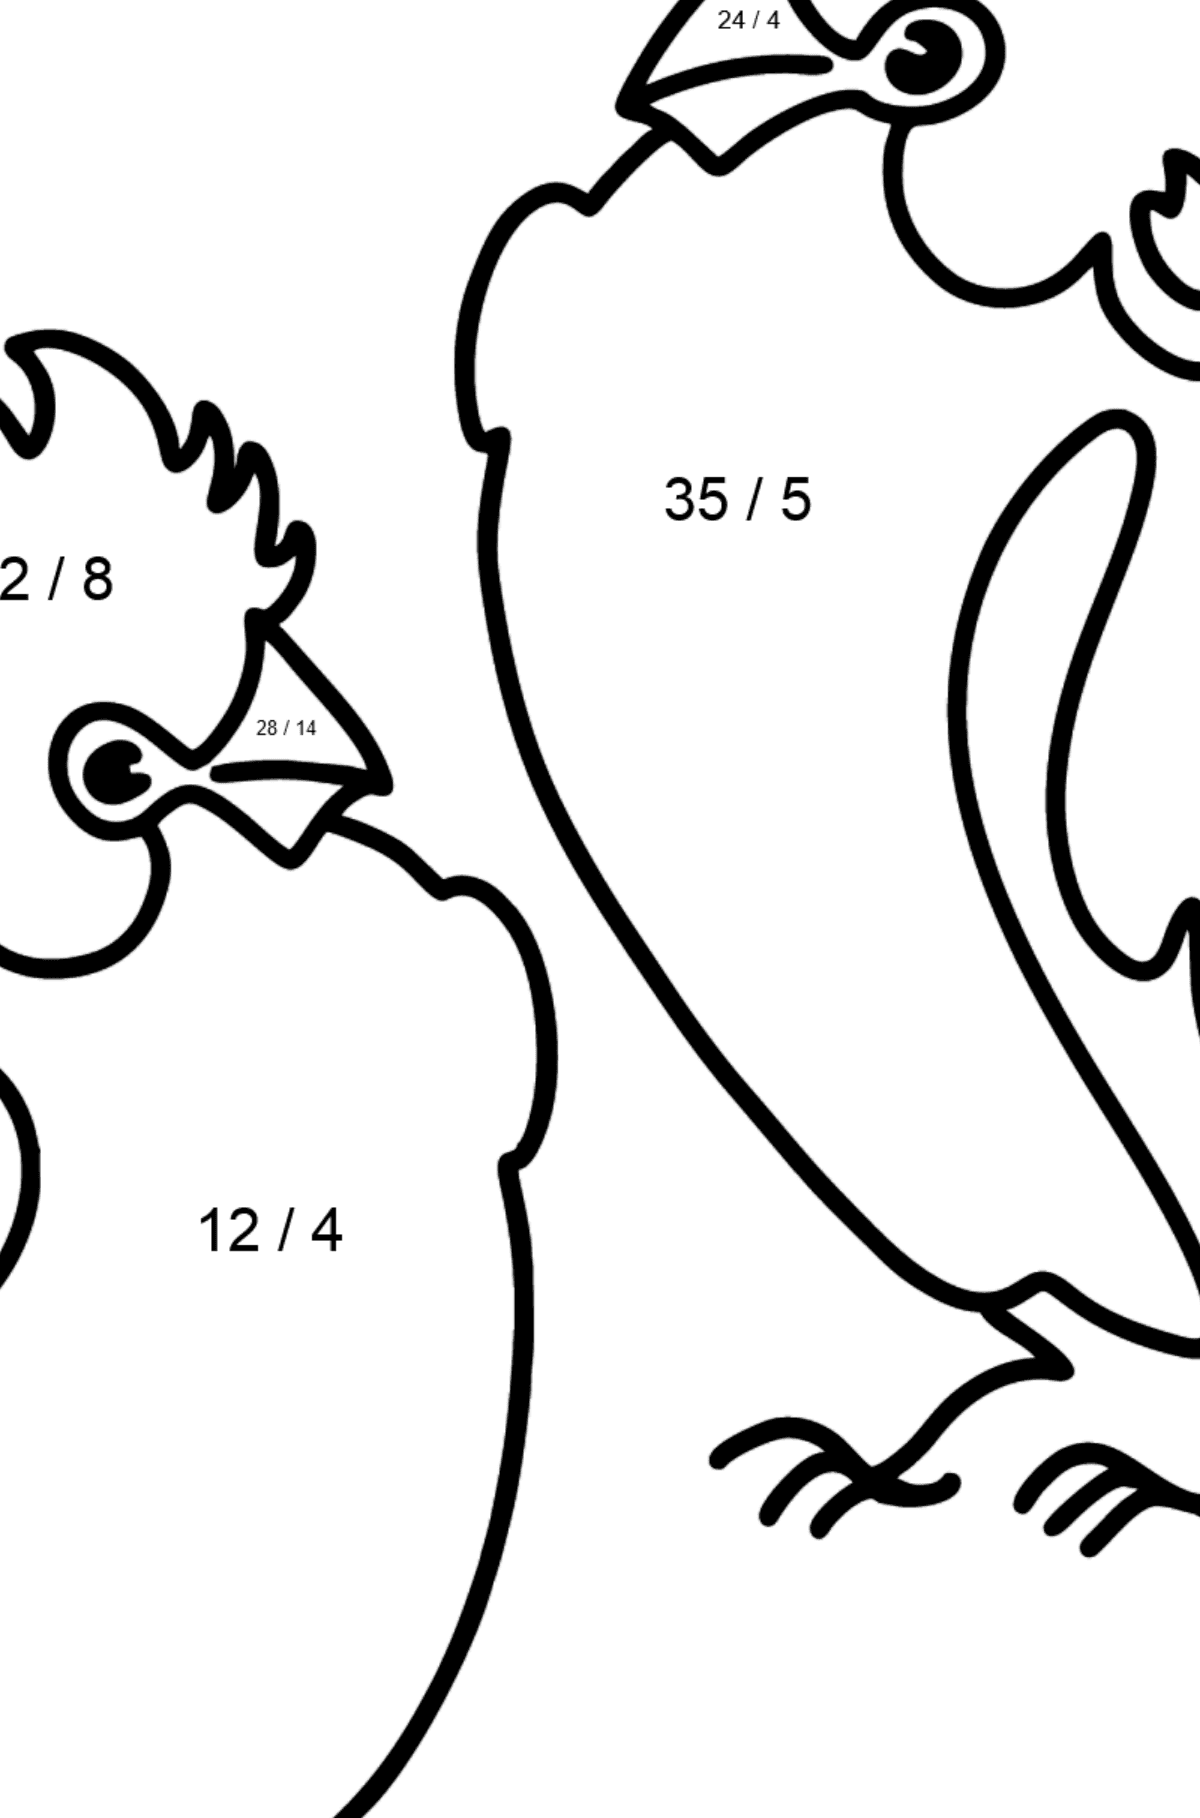 2 Parrots coloring page - Math Coloring - Division for Kids